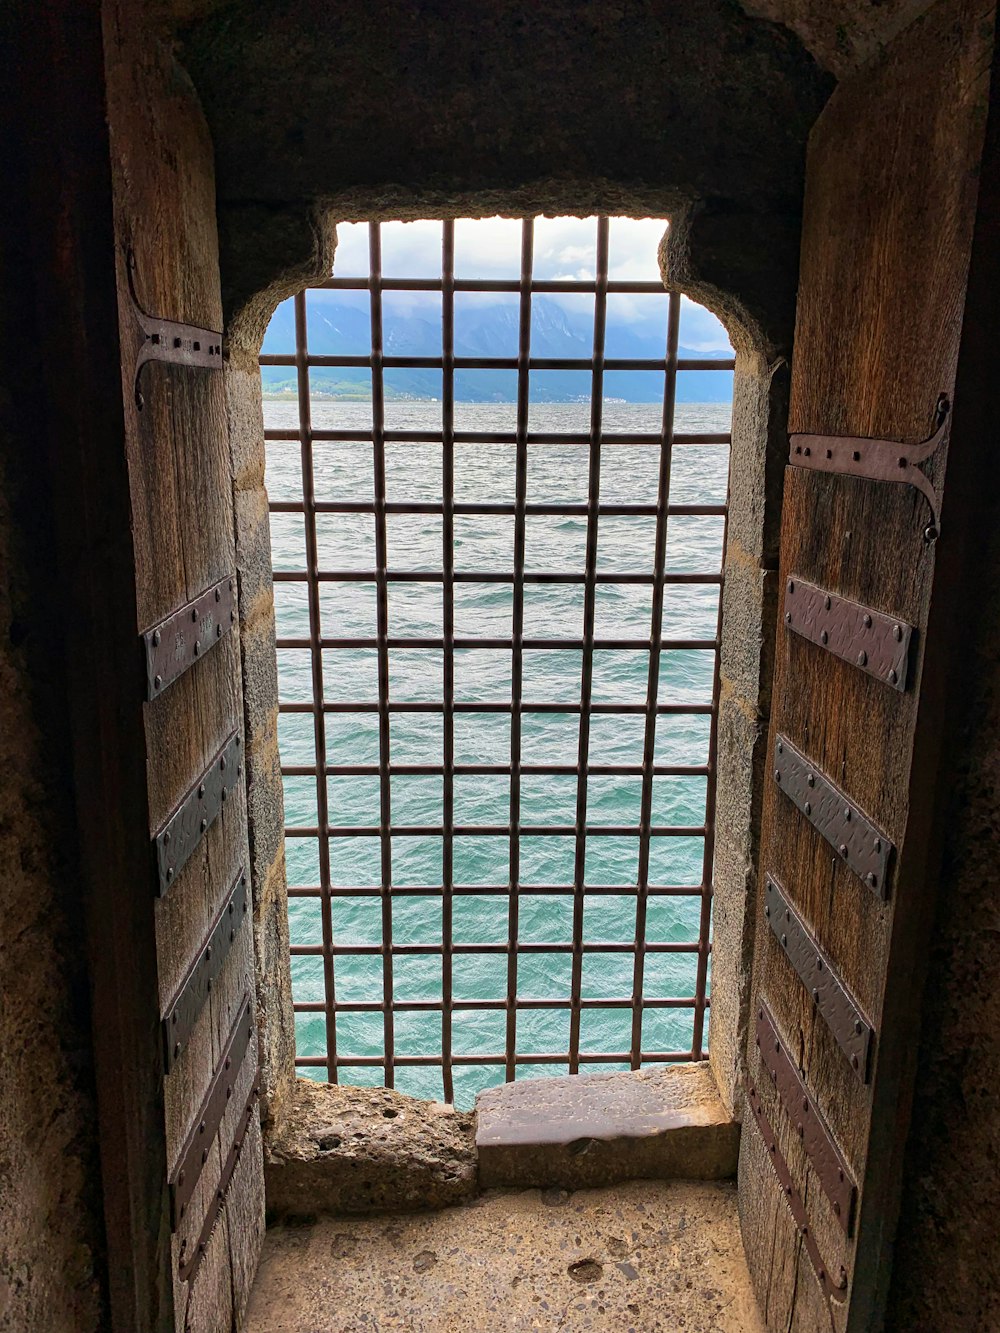 a window in a stone wall with a view of a body of water